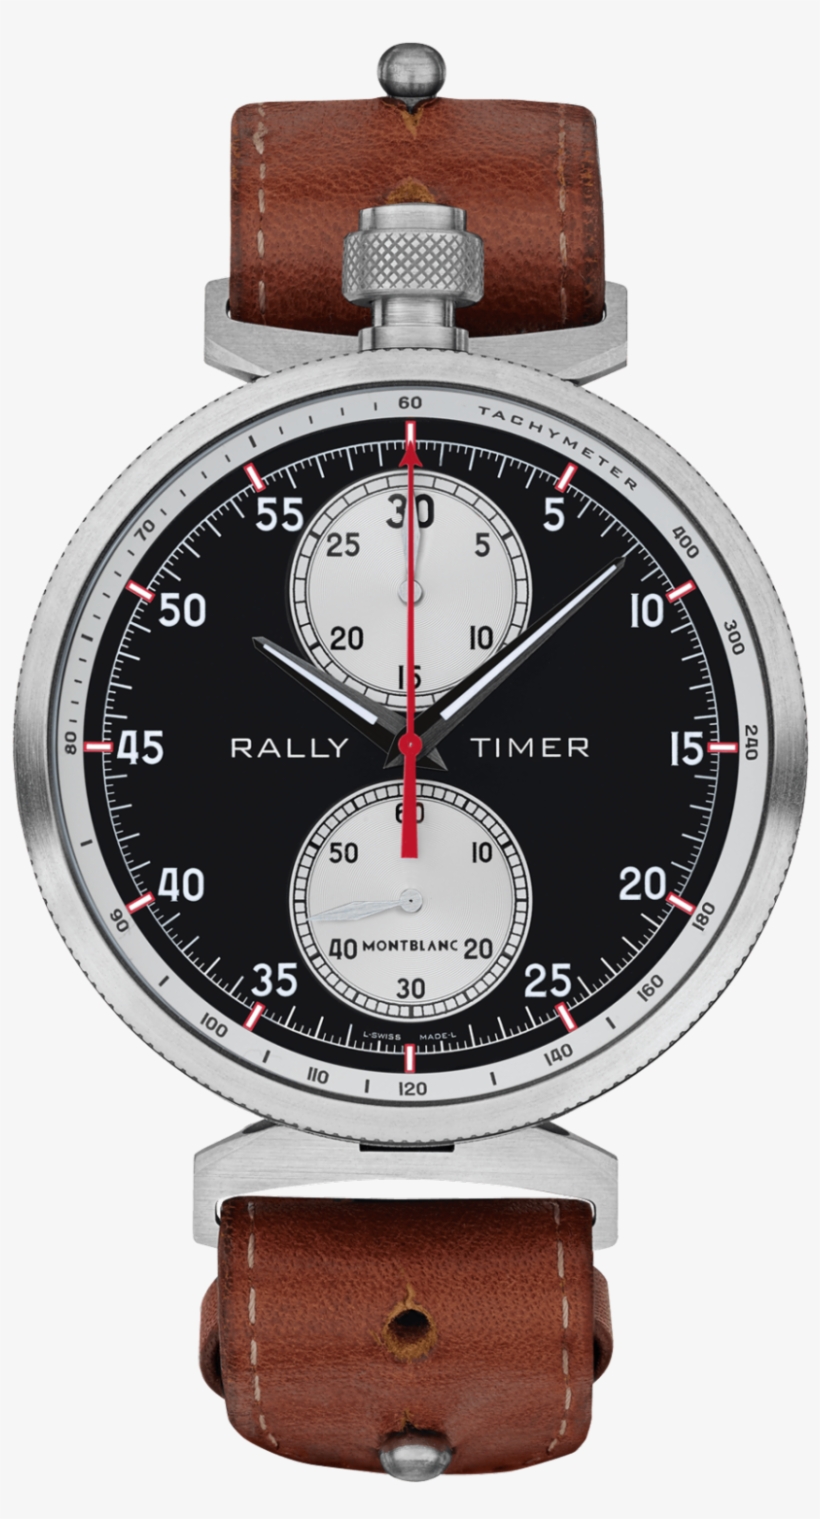 Montblanc Timewalker Rally Timer Chronograph Limited - Montblanc Timewalker Chronograph Rally Timer Limited, transparent png #3678443